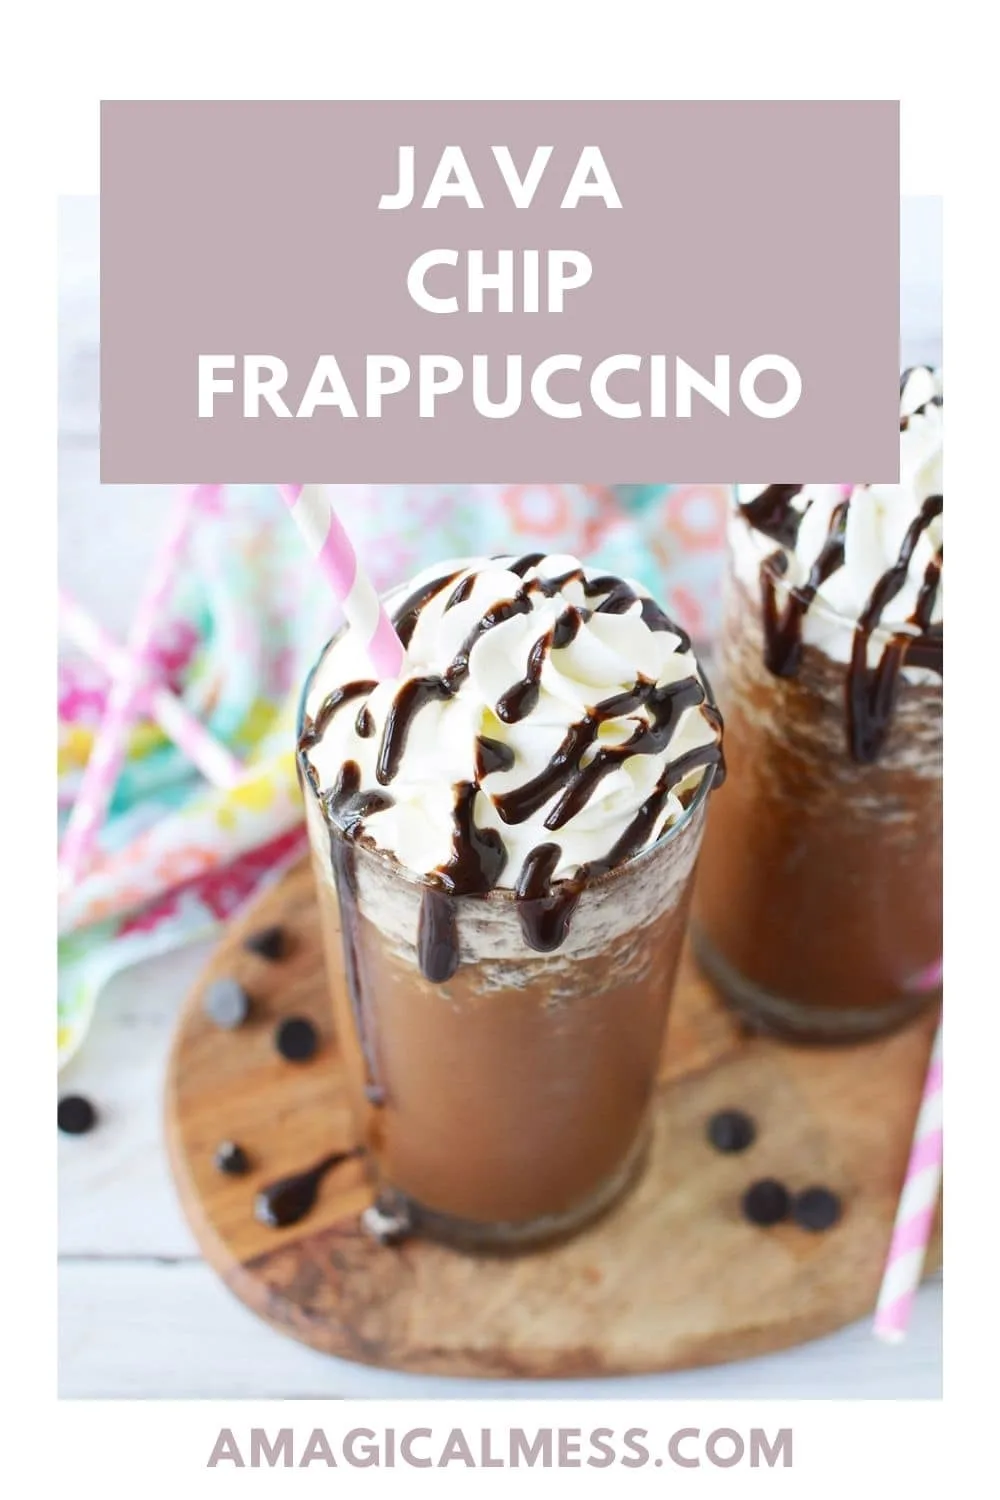 Java chip frappuccino in a glass with chips around it